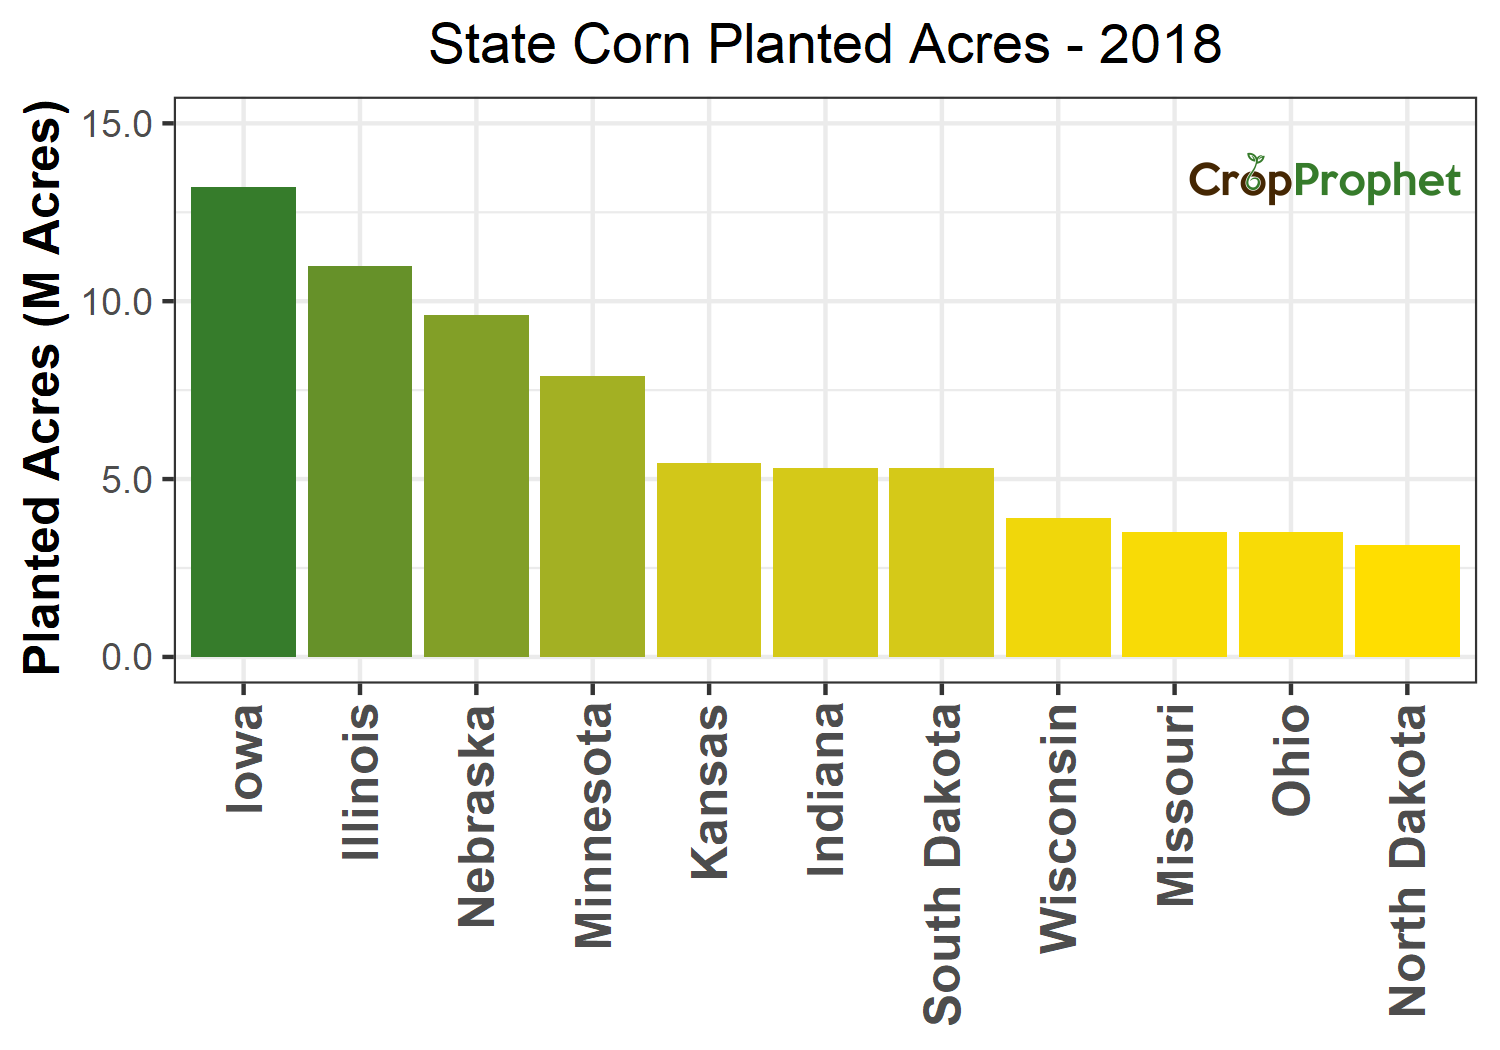 Corn Production by State - 2018 Rankings